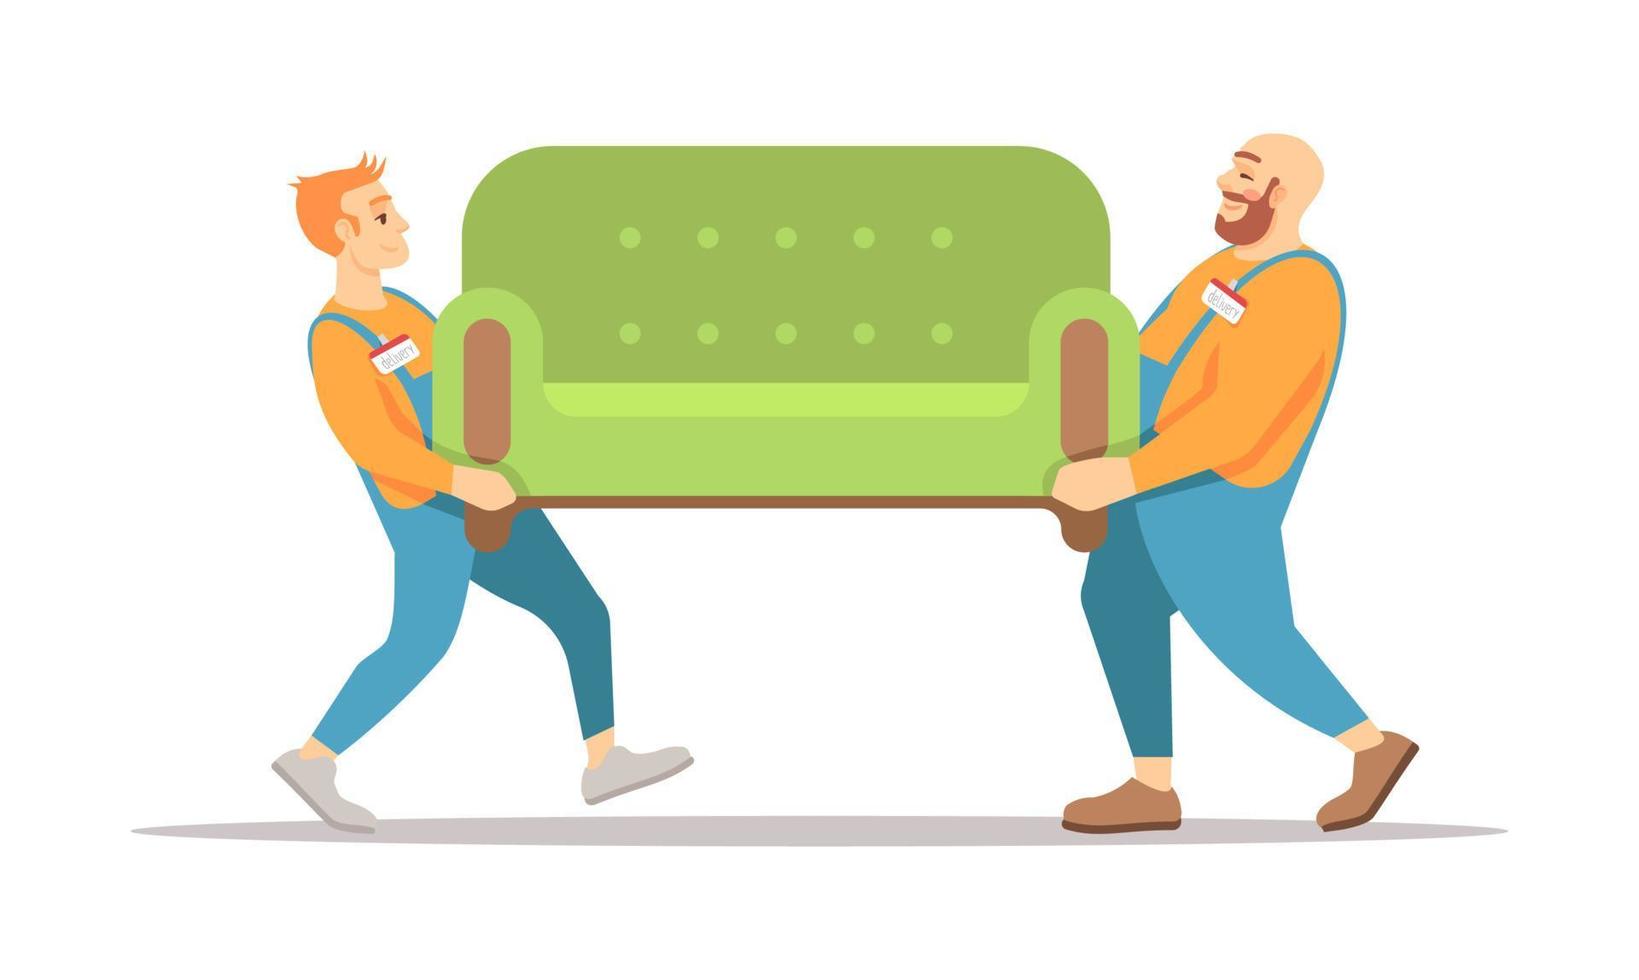 Furniture delivery service vector illustration. Two deliverymen carrying sofa isolated cartoon characters on white background. Male loaders wearing uniform. Moving house, relocation service workers